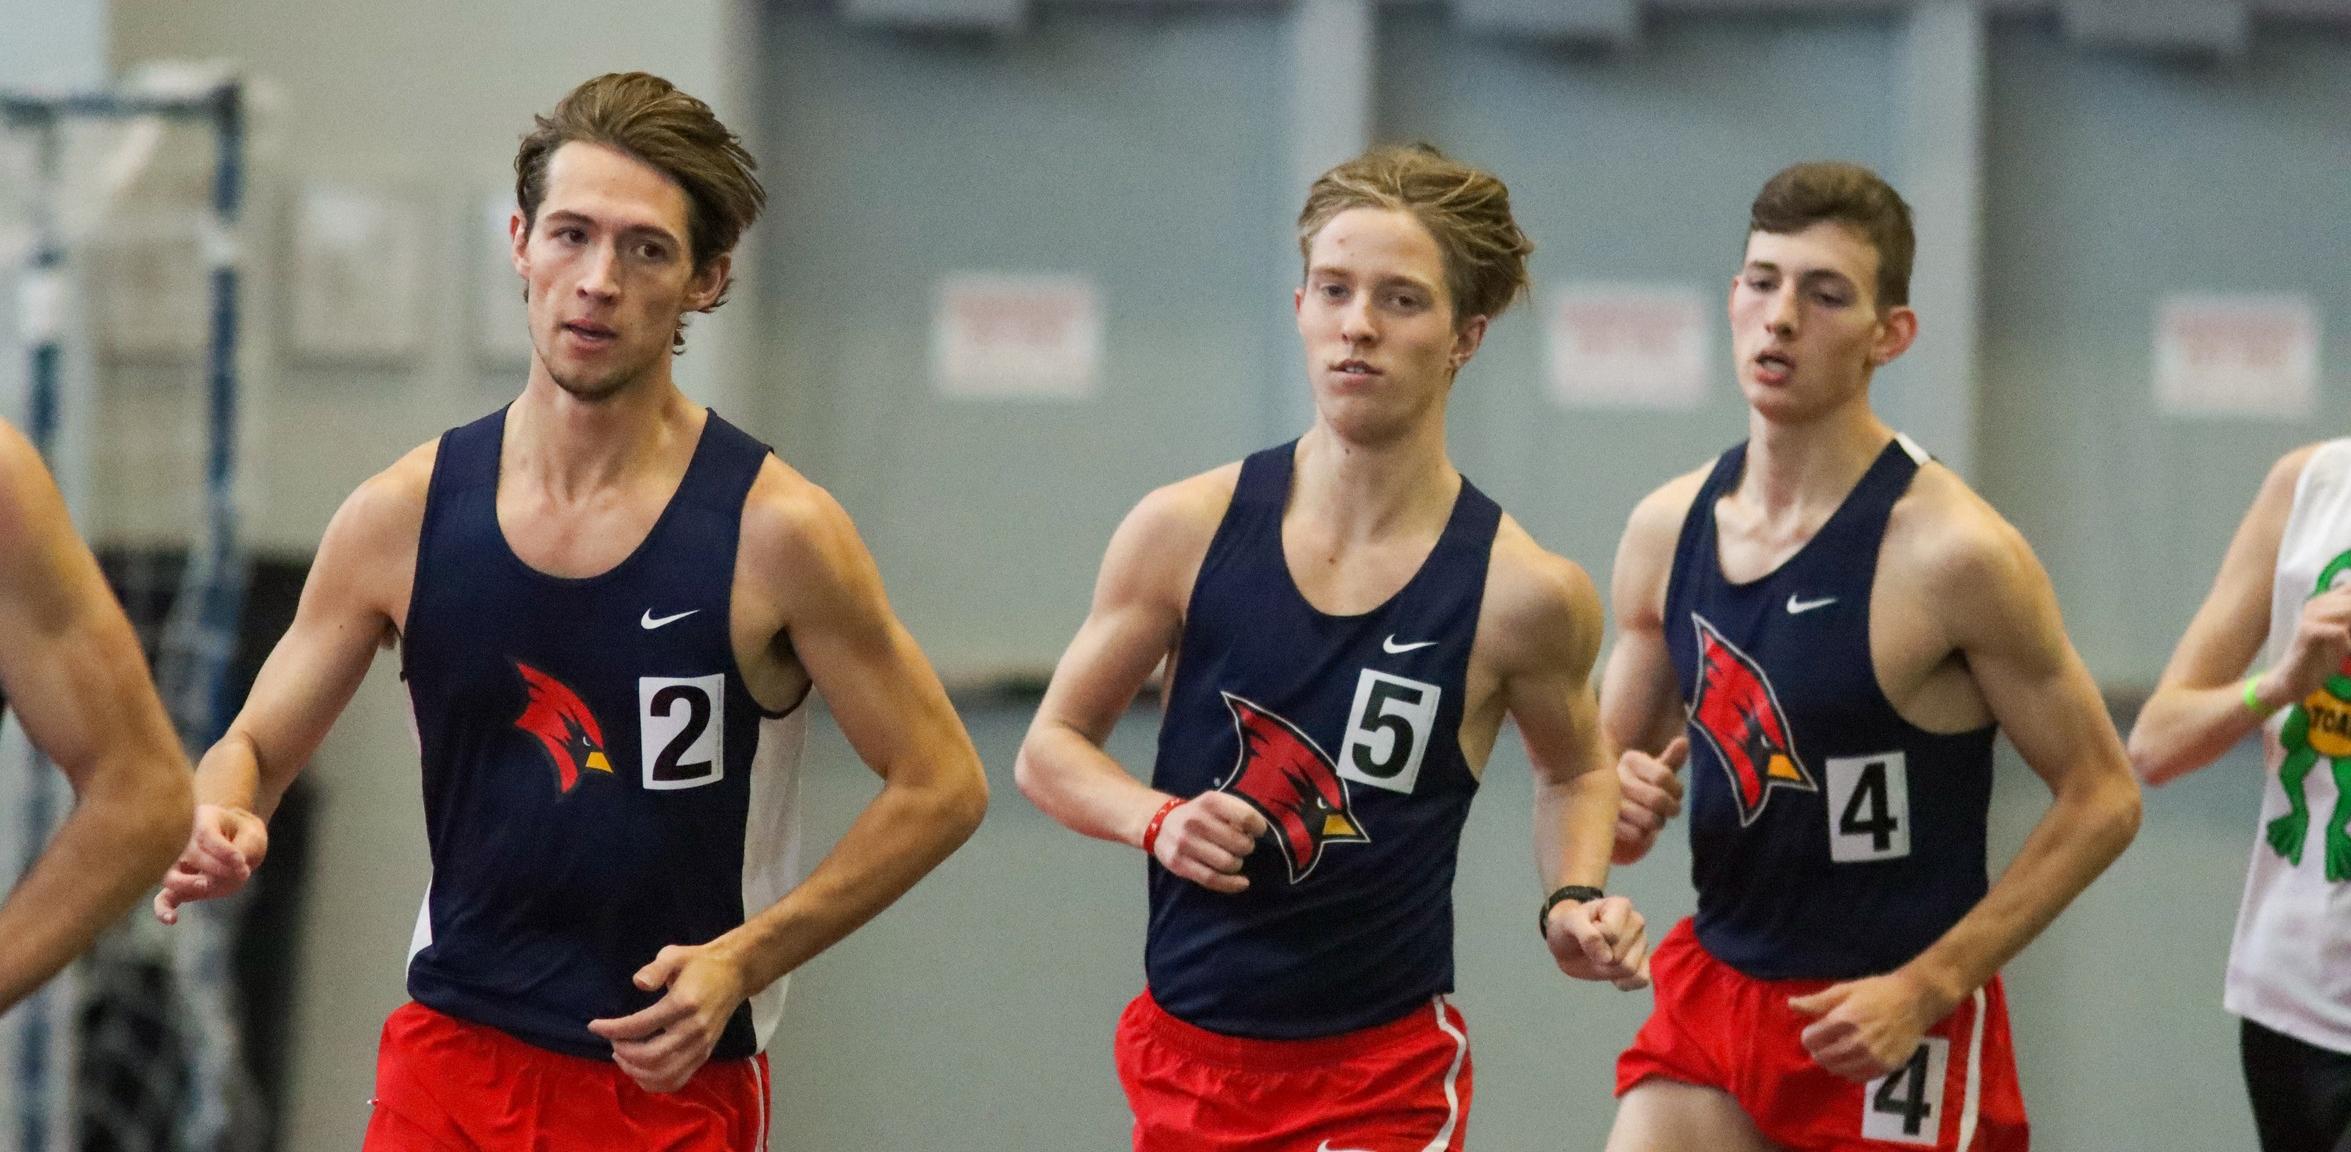 Eight Cardinal Runners Compete in WashU Distance Carnival